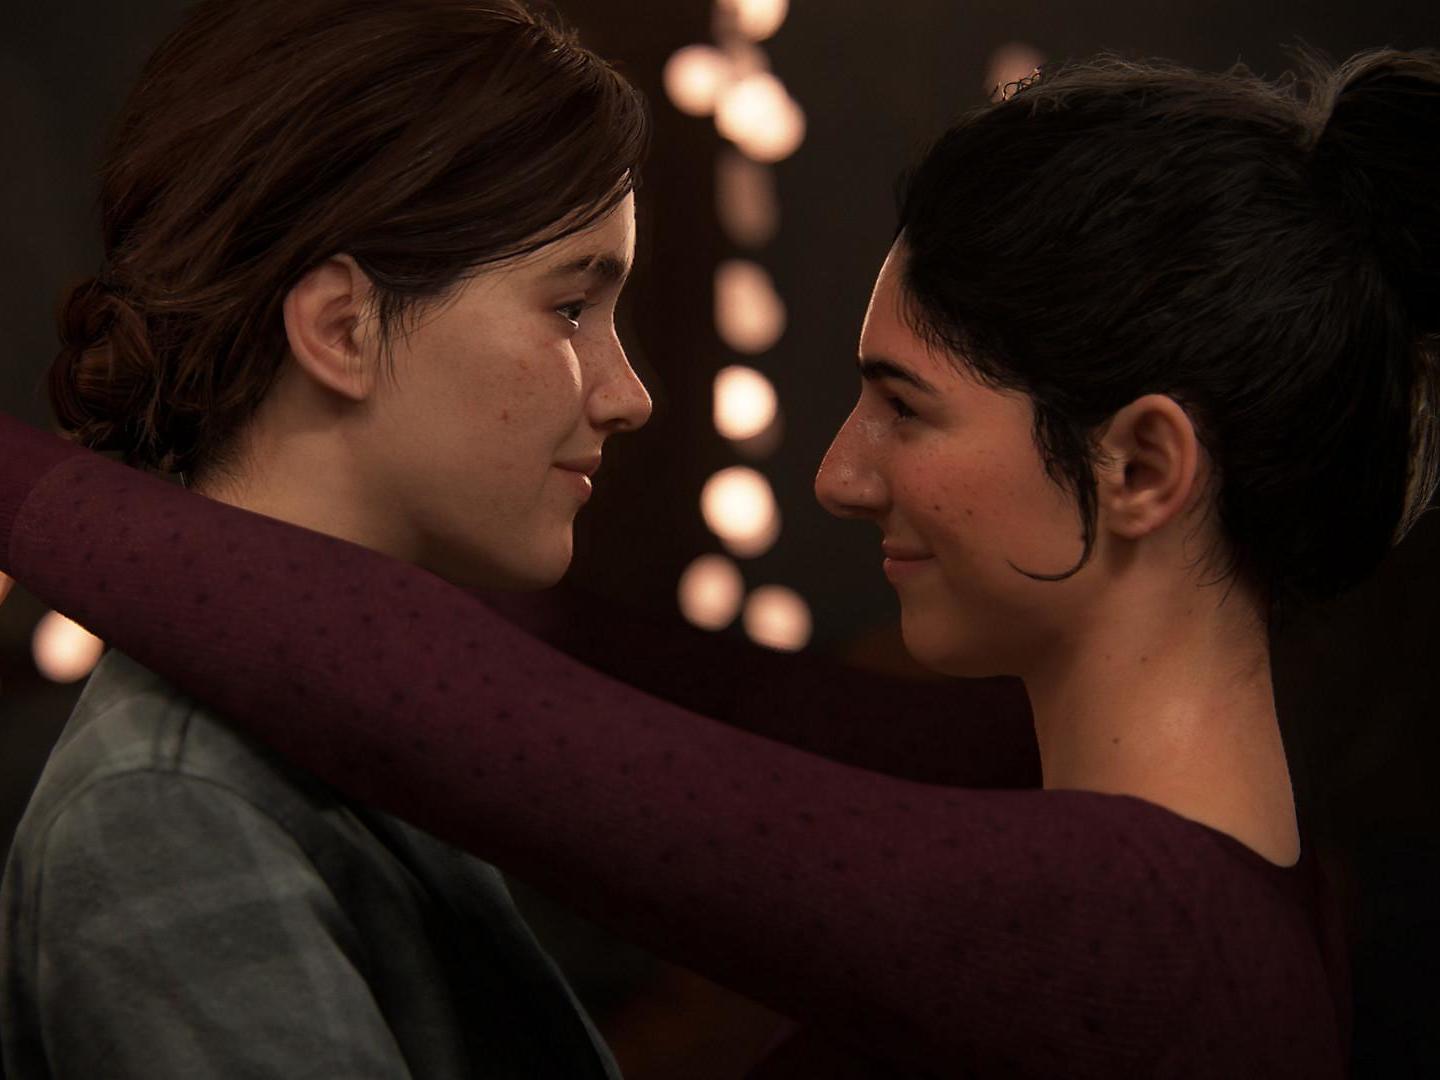 Ellie (Ashley Johnson) and Dina (Shannon Woodward) are the two most prominent queer characters in the acclaimed blockbuster game